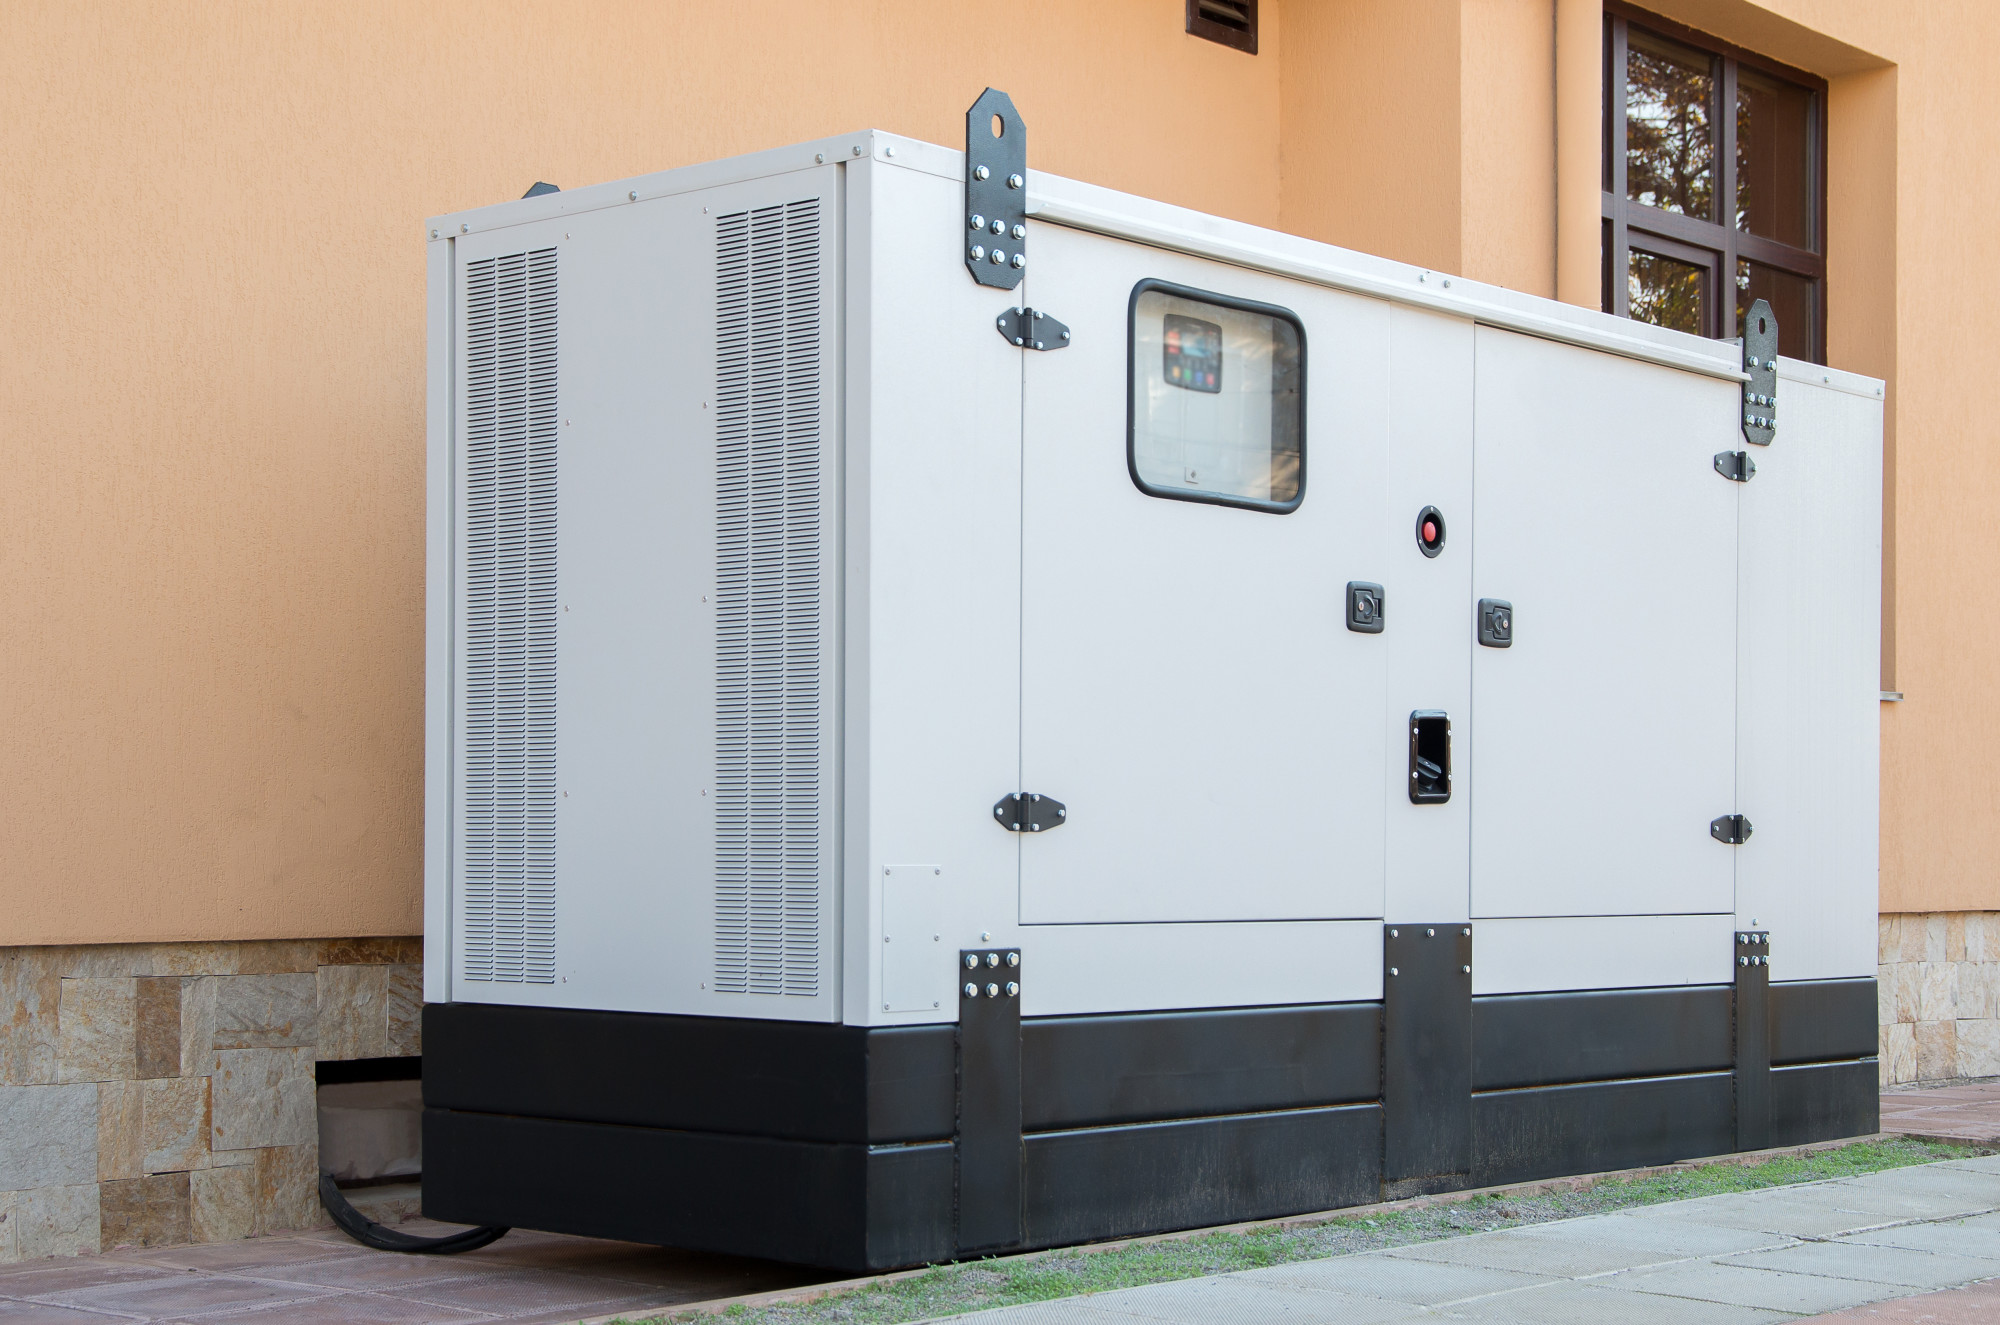 The Benefits of a Home Generator During a Disaster